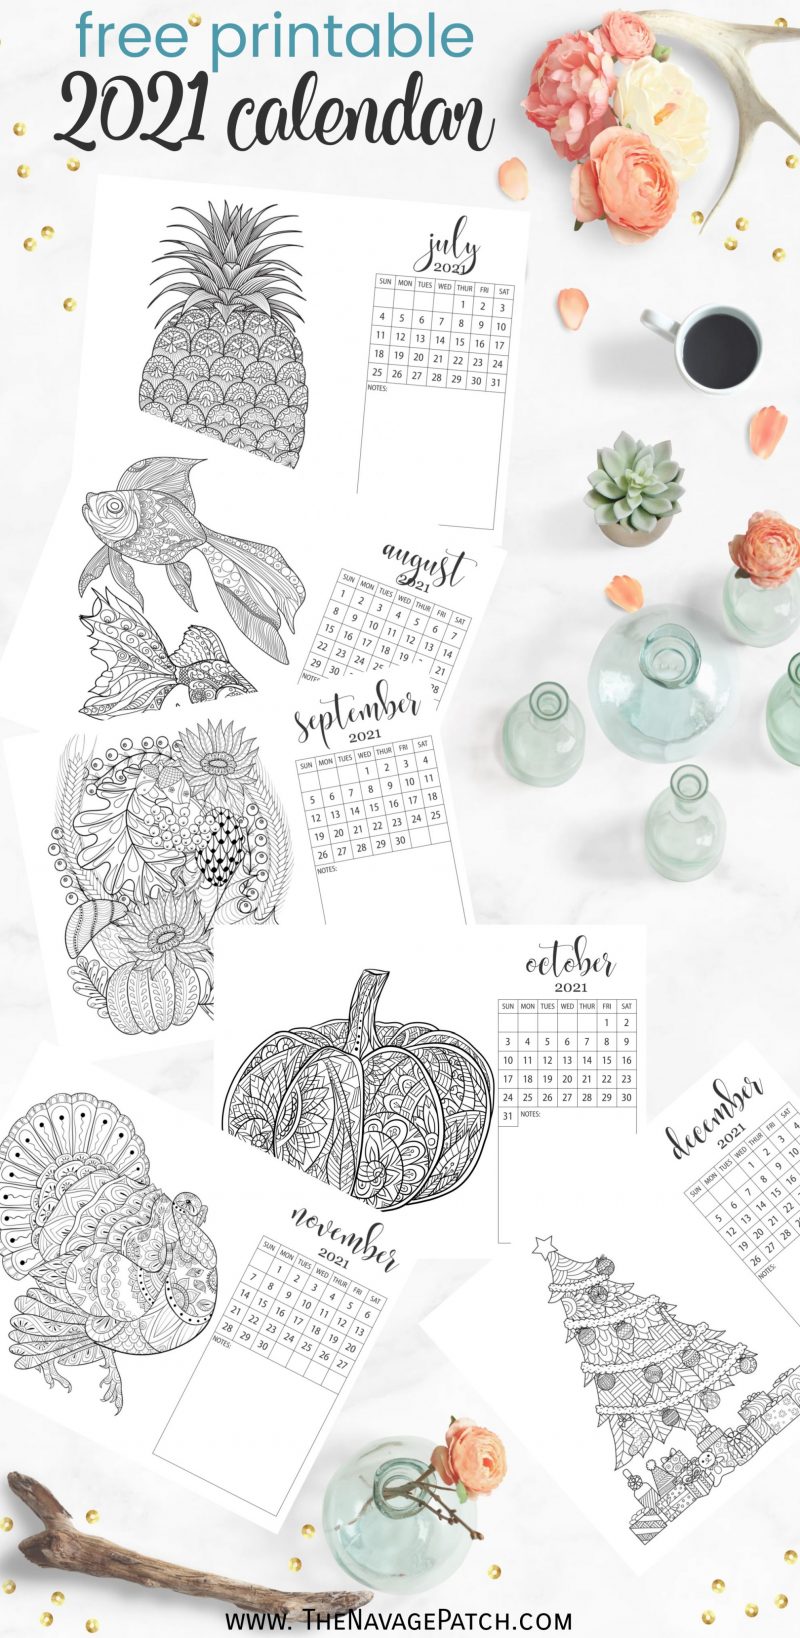 Free Printable Adult Coloring Page Calendar by TheNavagePatch.com